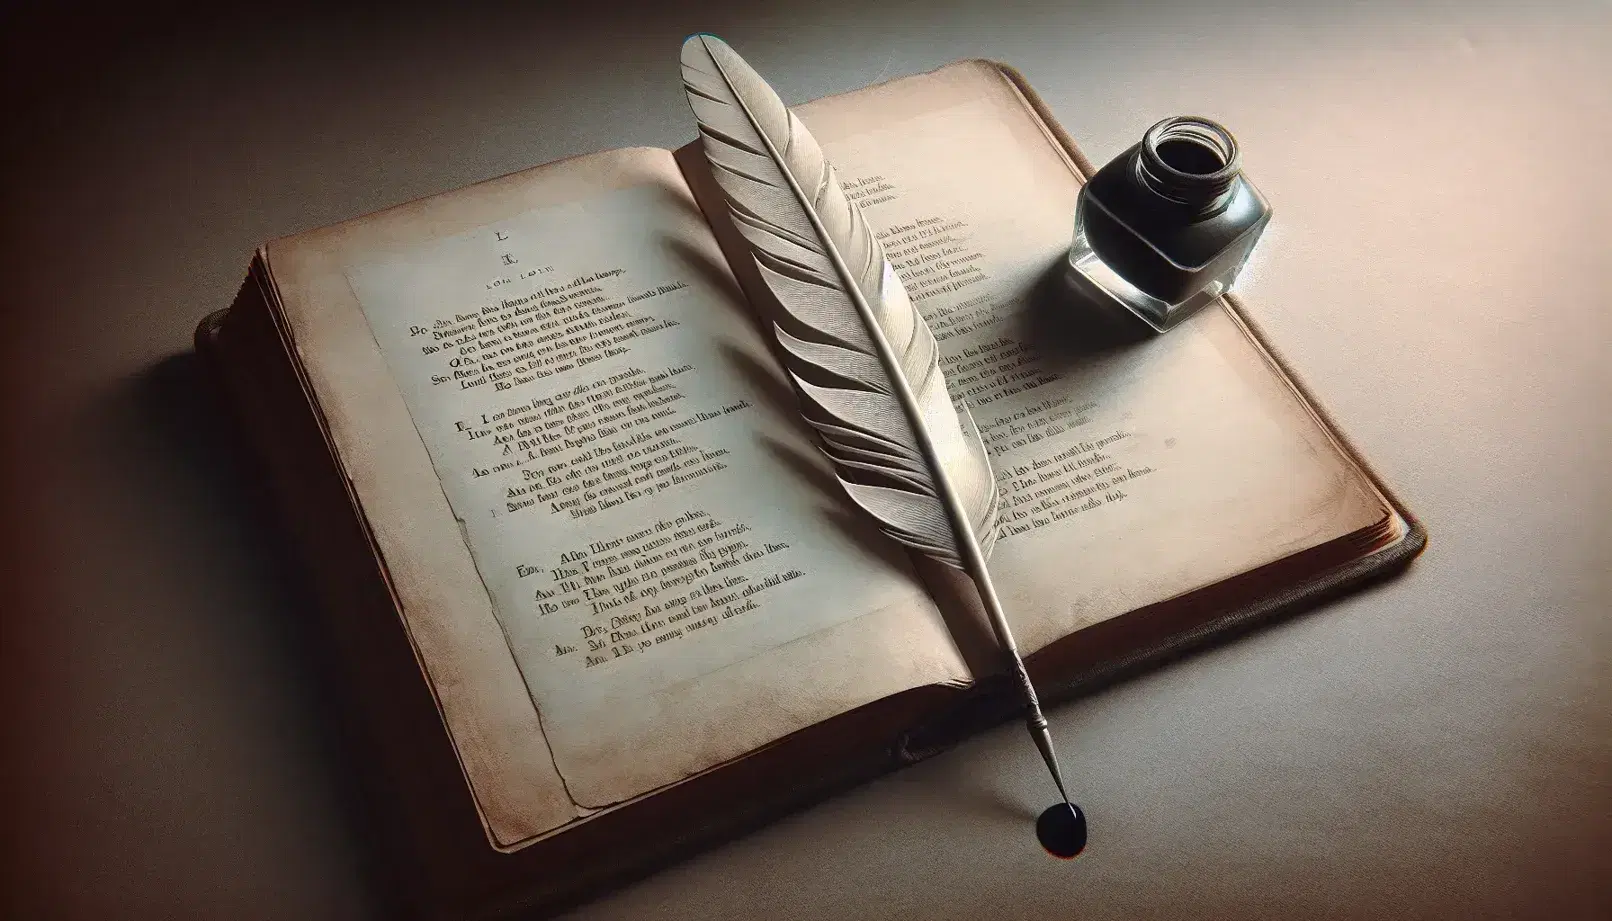 Vintage open book with yellowed pages and structured poem stanzas, white quill with ink drop above, and glass inkwell on a wooden table.